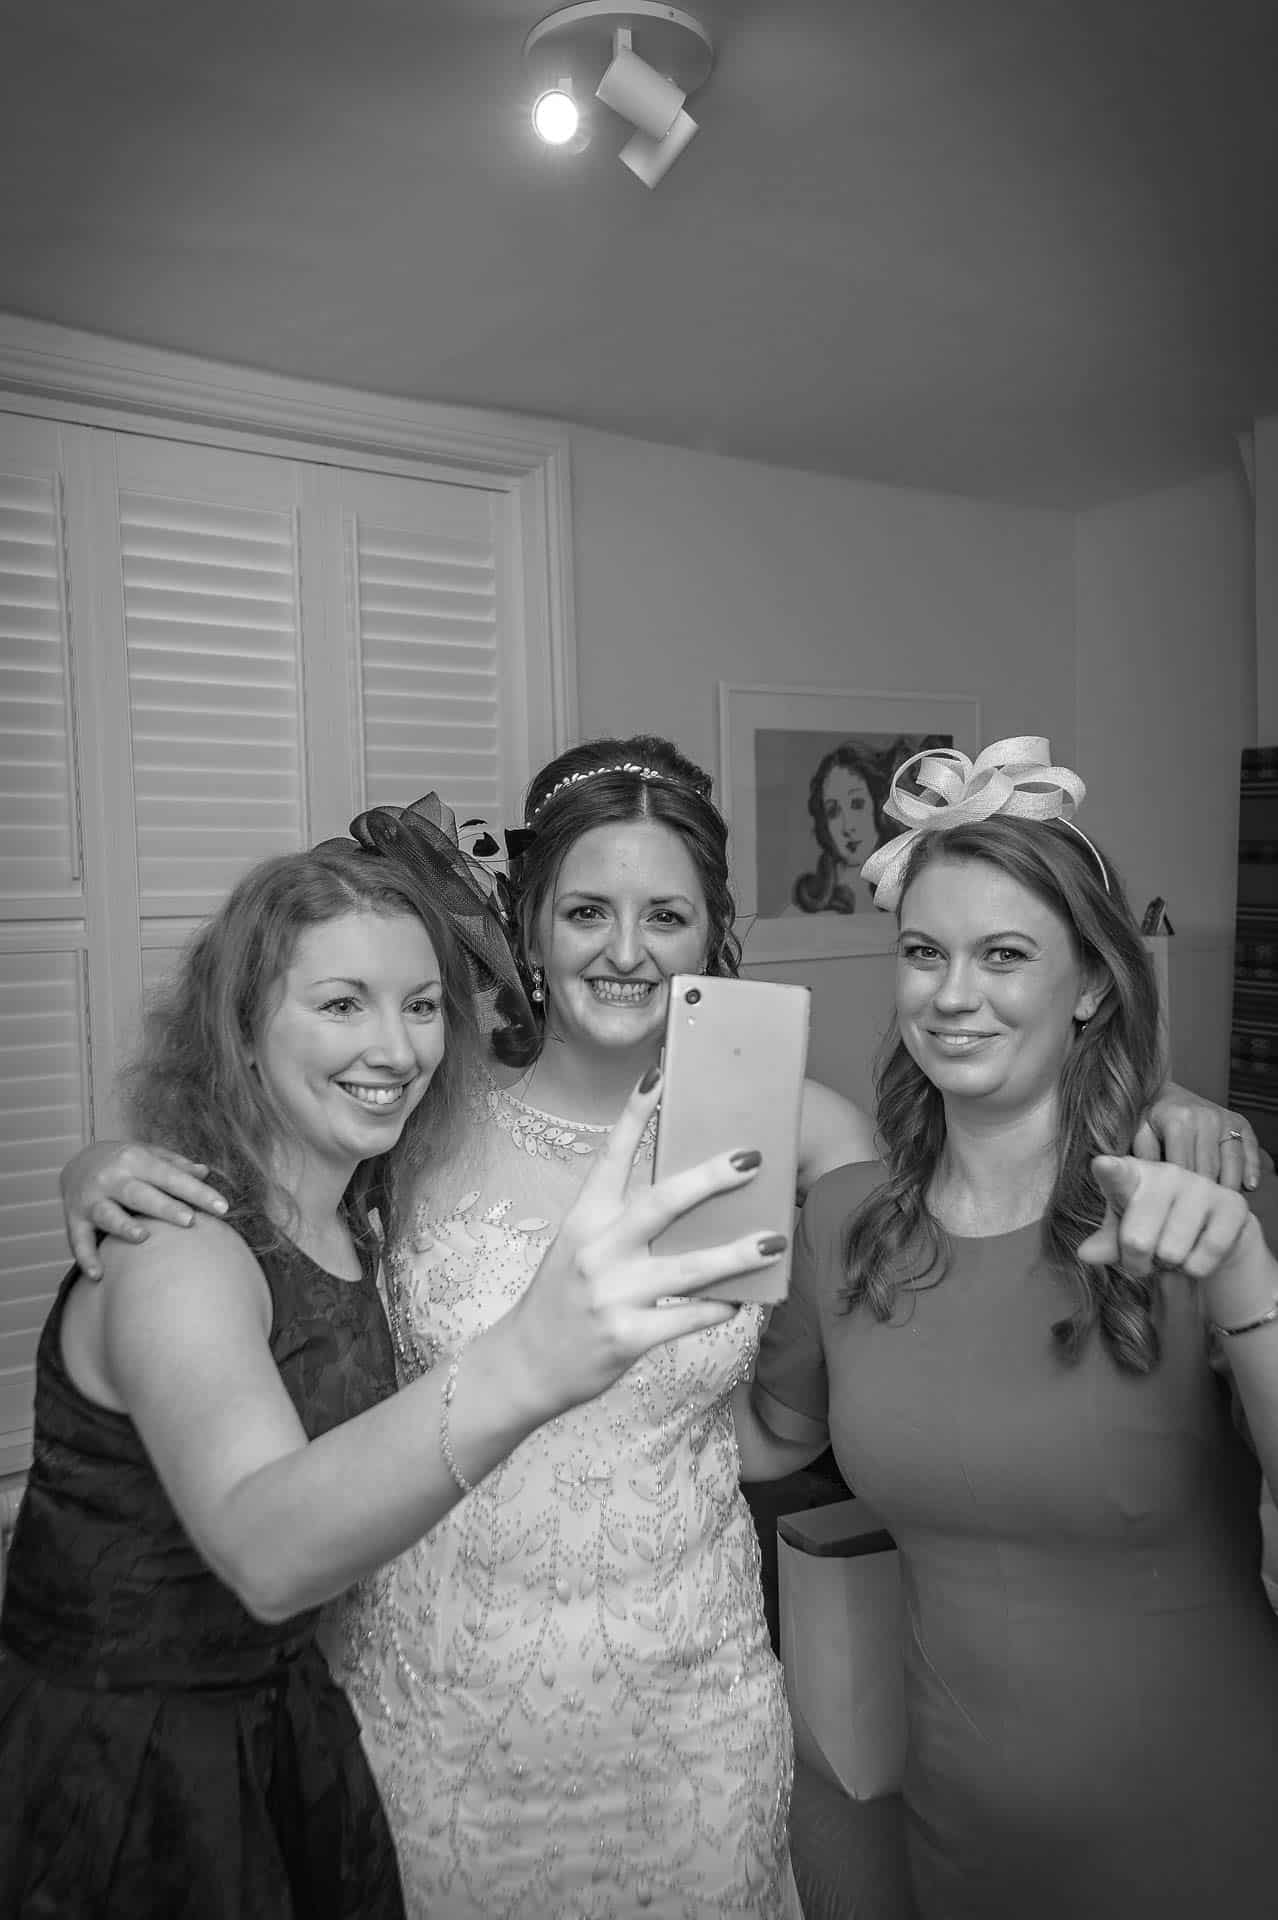 Bride with fiends taking selfie at preparations